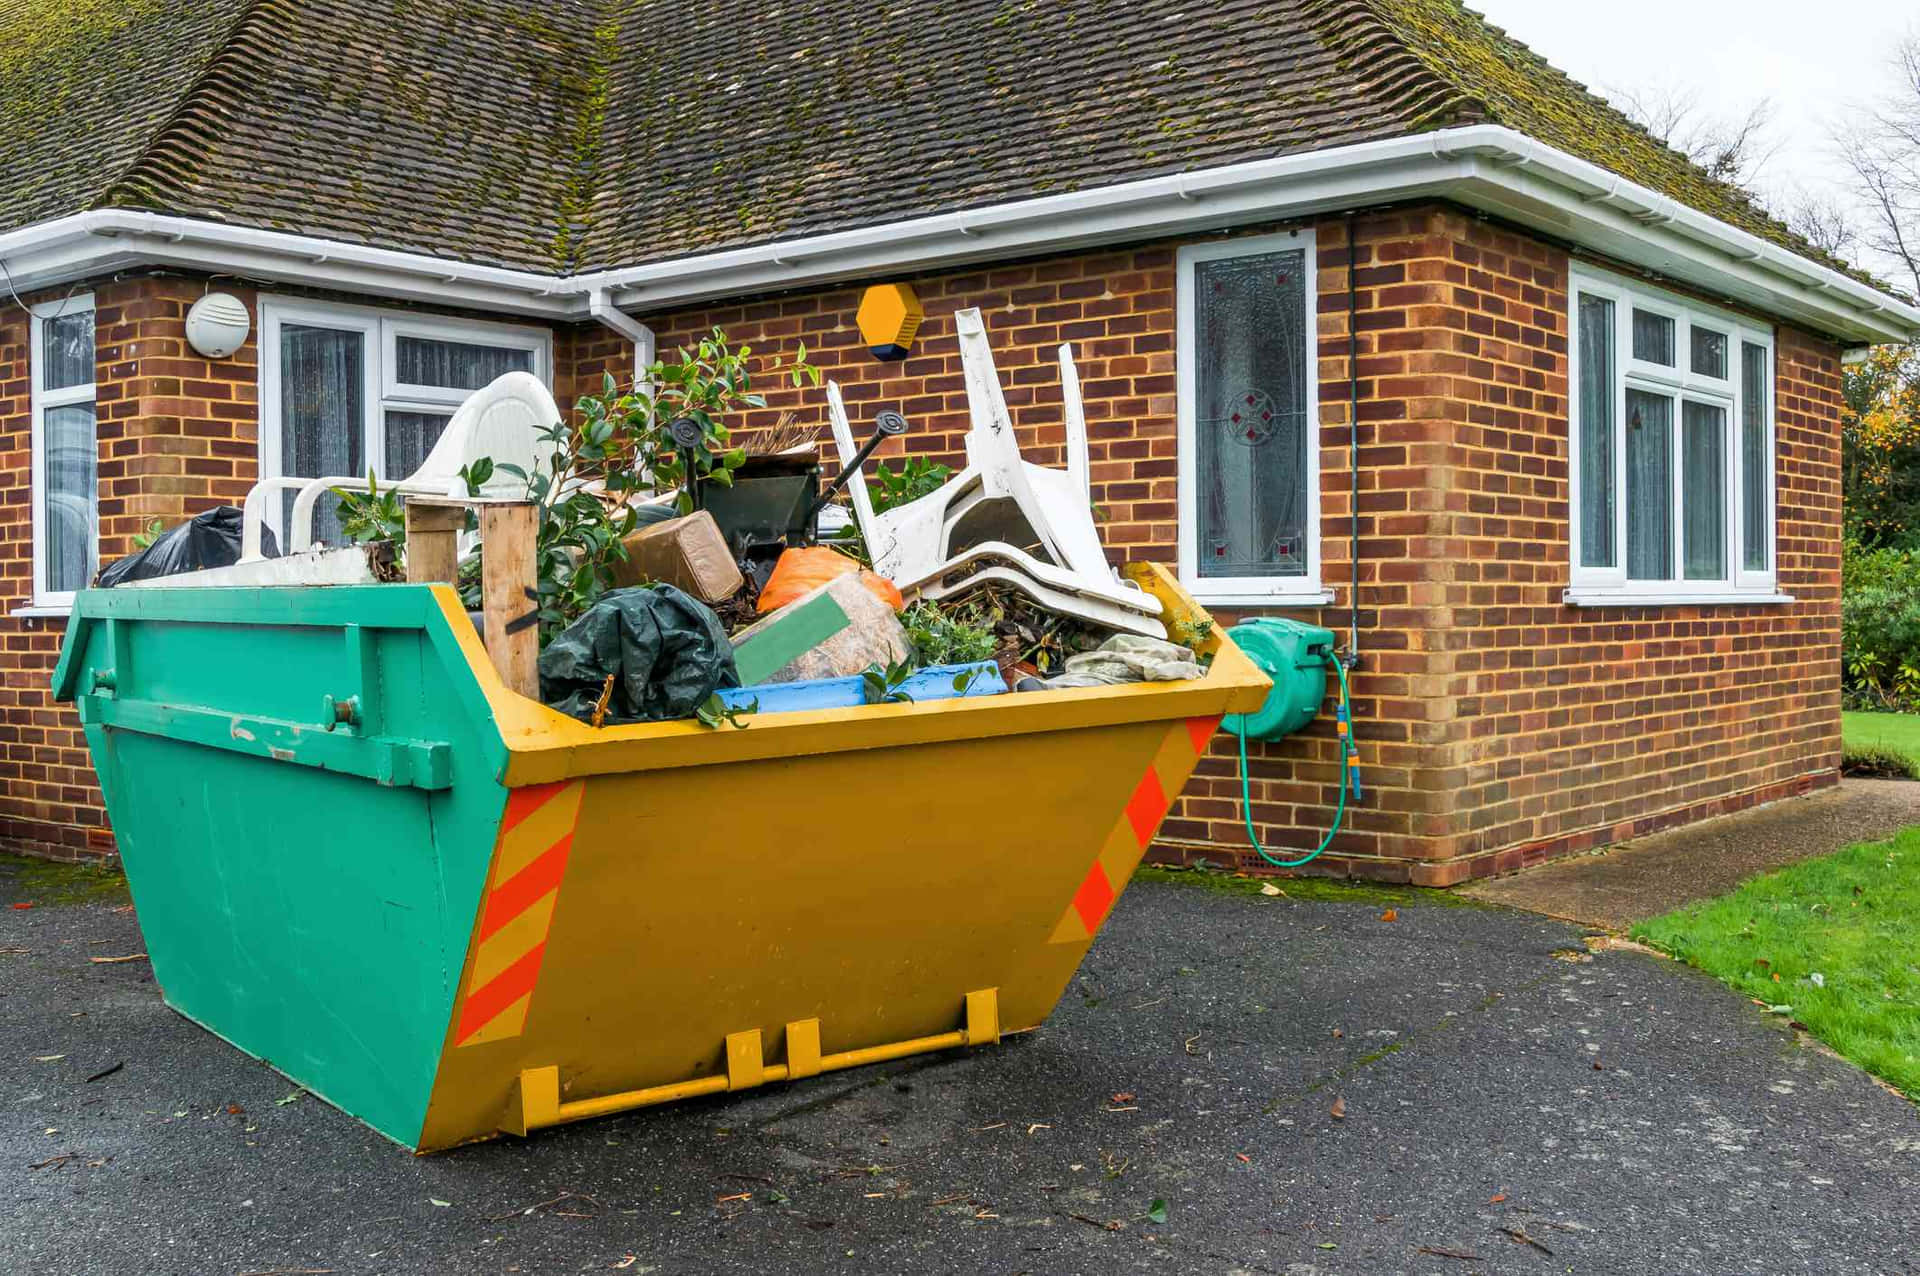 A Green Garbage Bin In Front Of A House